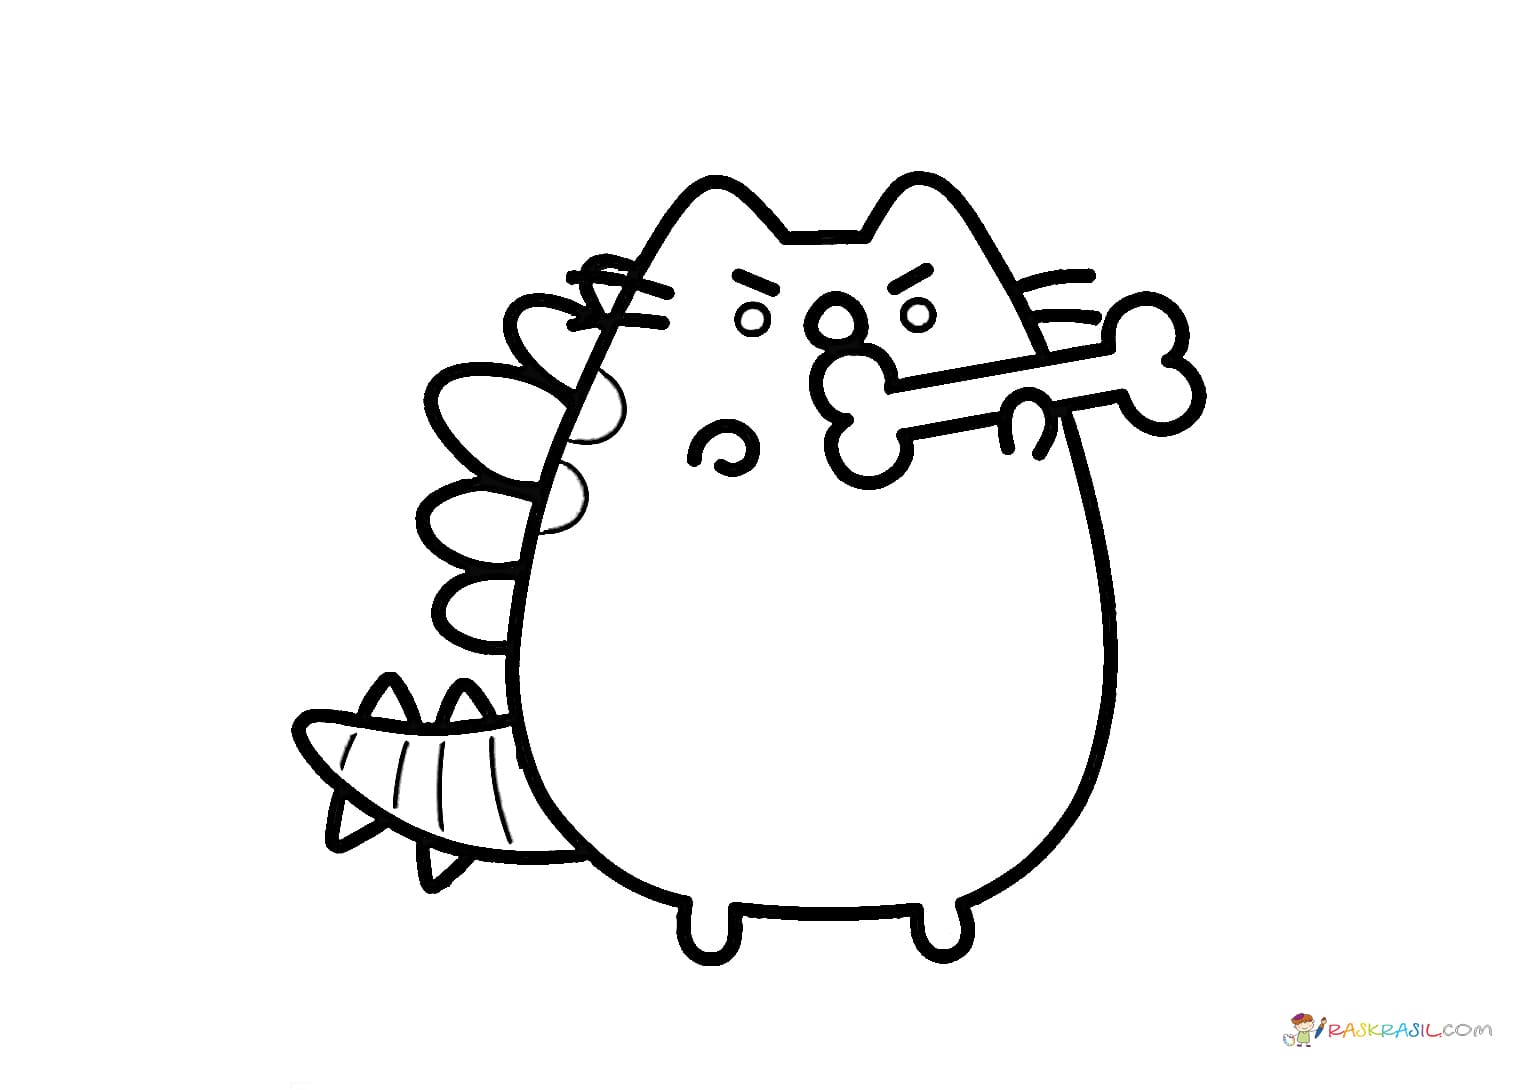 16 Sushi Pusheen Coloring Pages Printable Coloring Pages